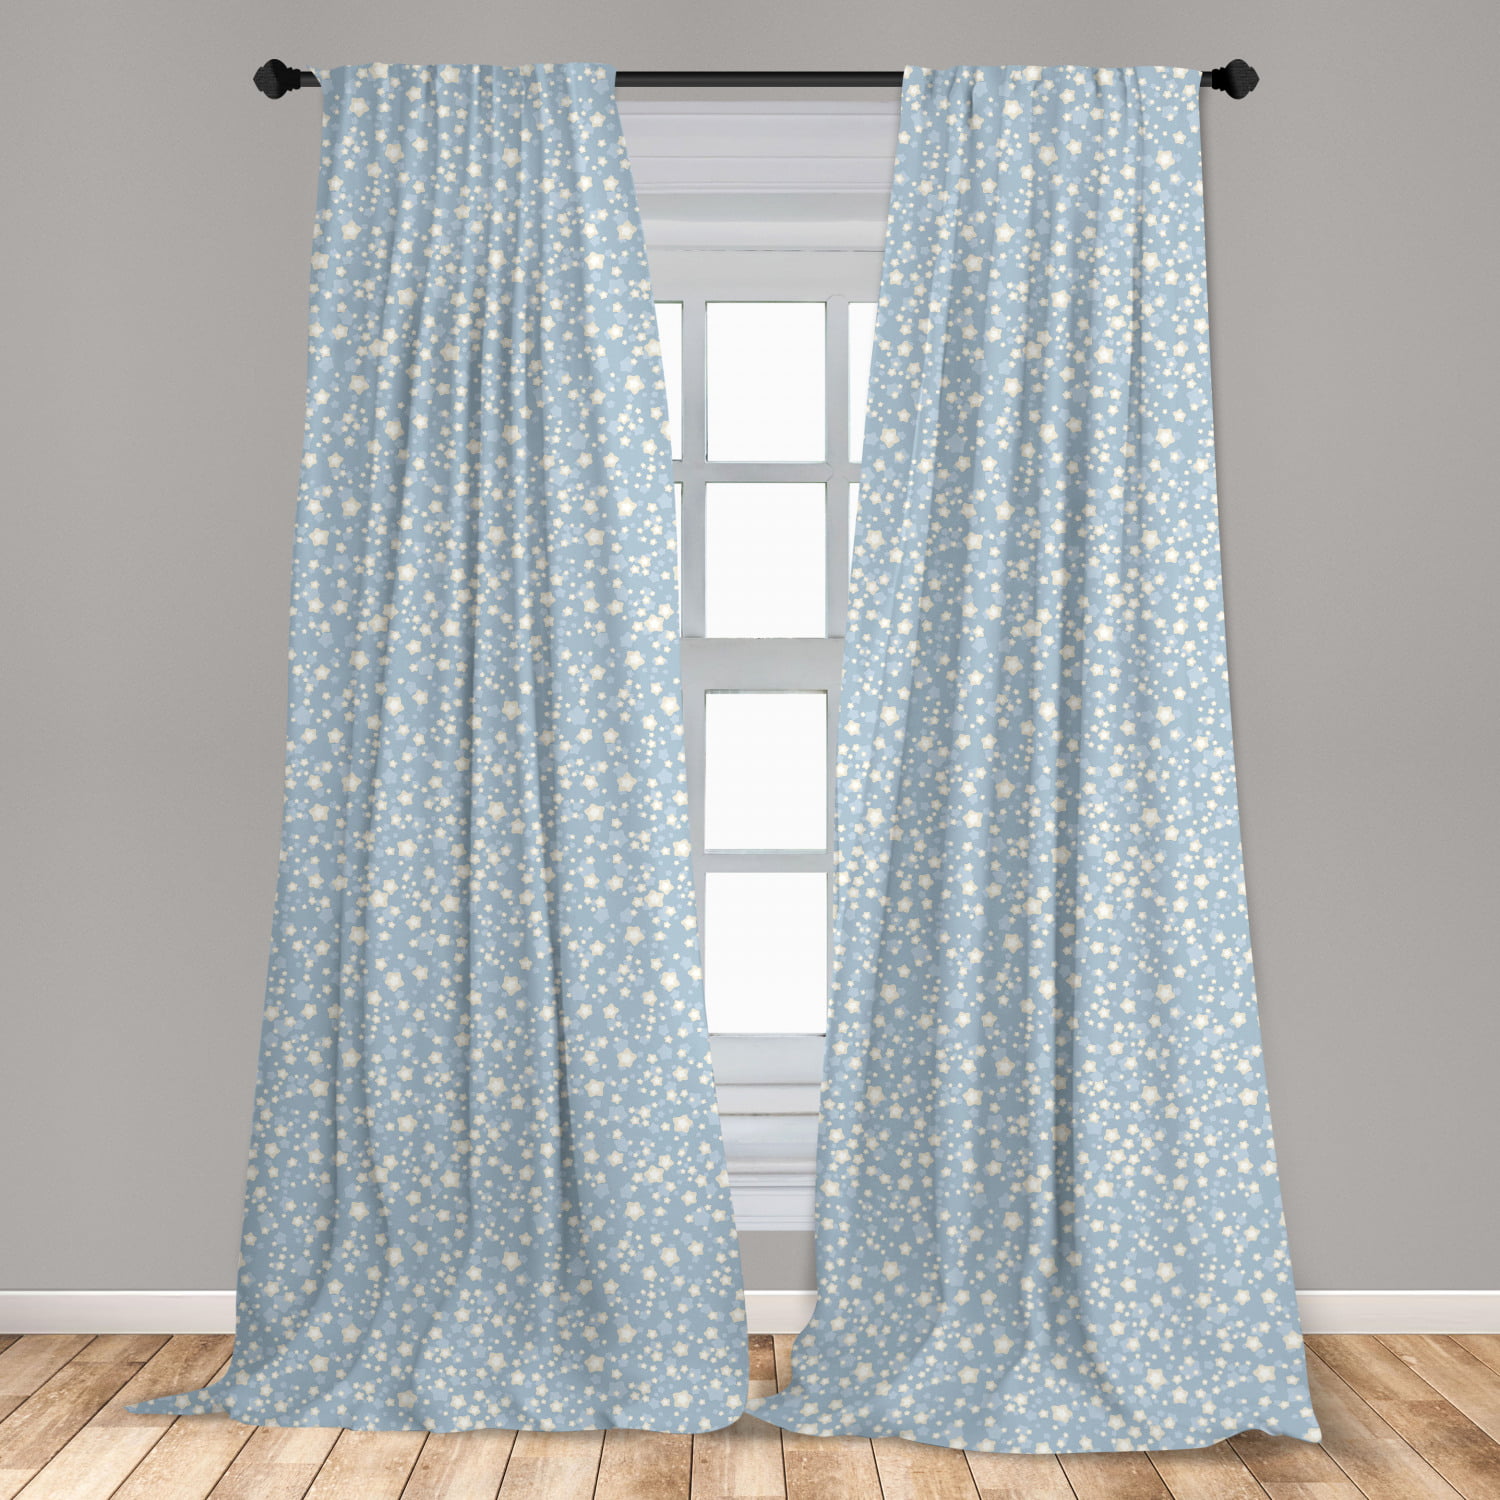 Ivory and Blue Curtains 2 Panels Set, Star Pattern on Silhouettes Background  Nursery Doodle Illustration, Window Drapes for Living Room Bedroom, 56